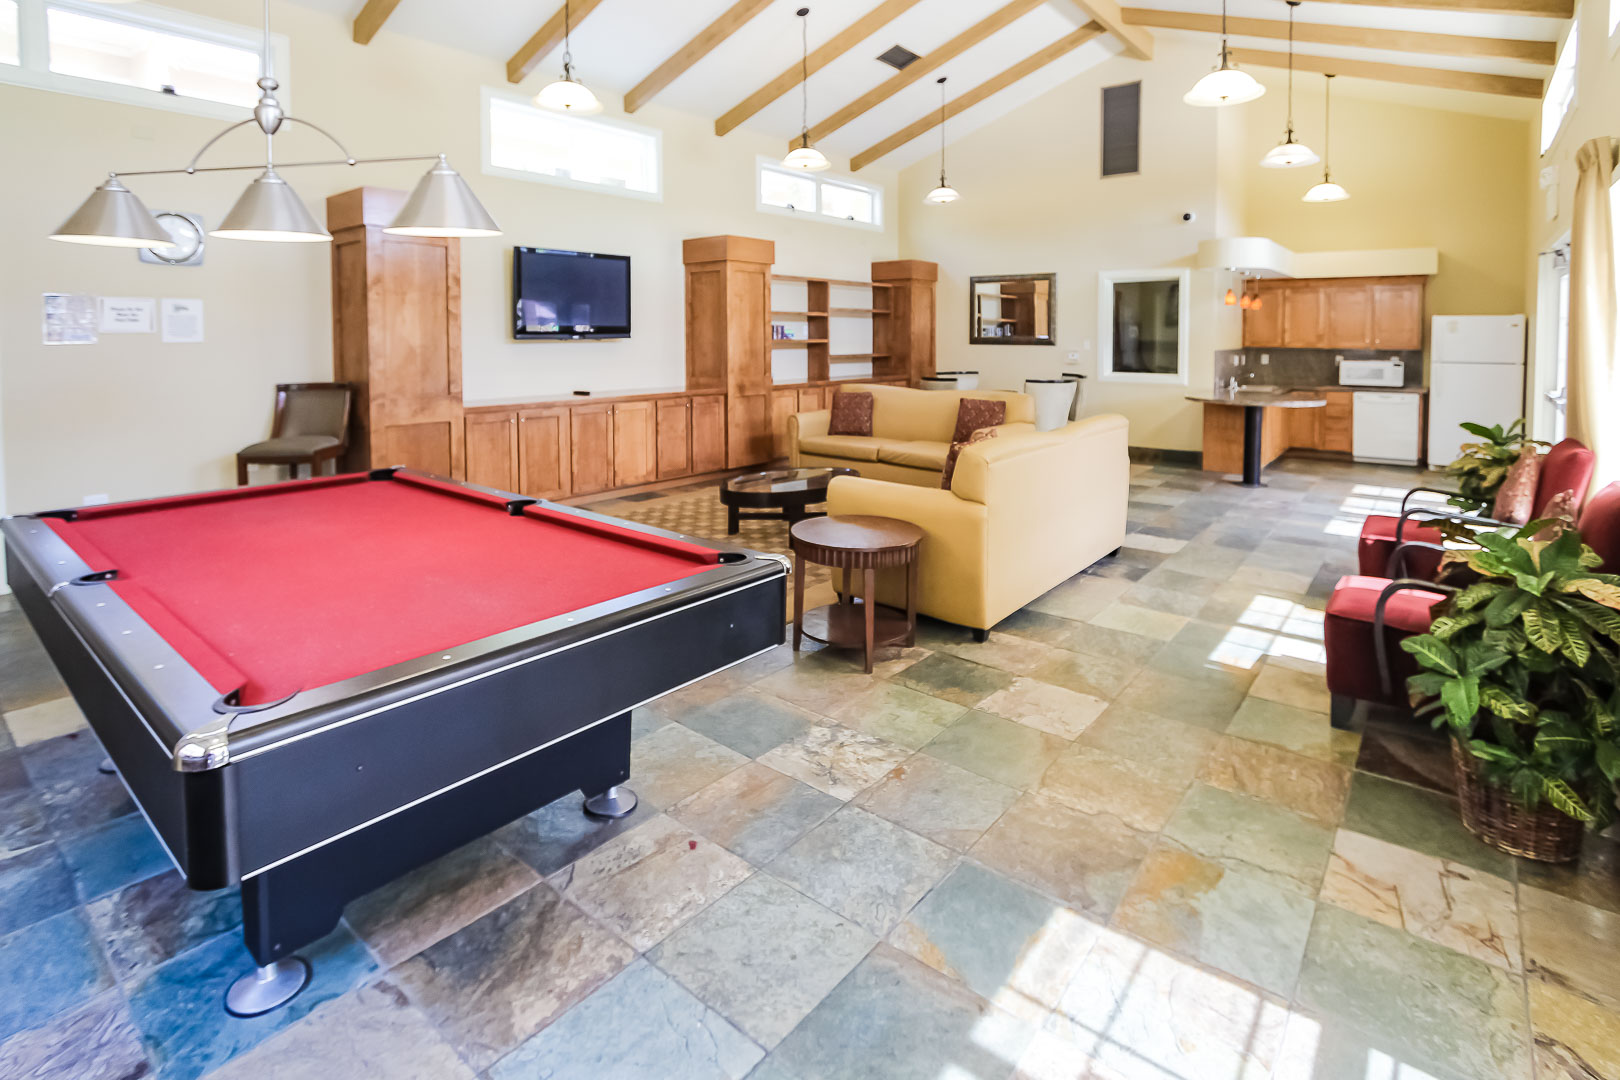 A community area with a pool table at VRI's Winner Circle Resort in California.